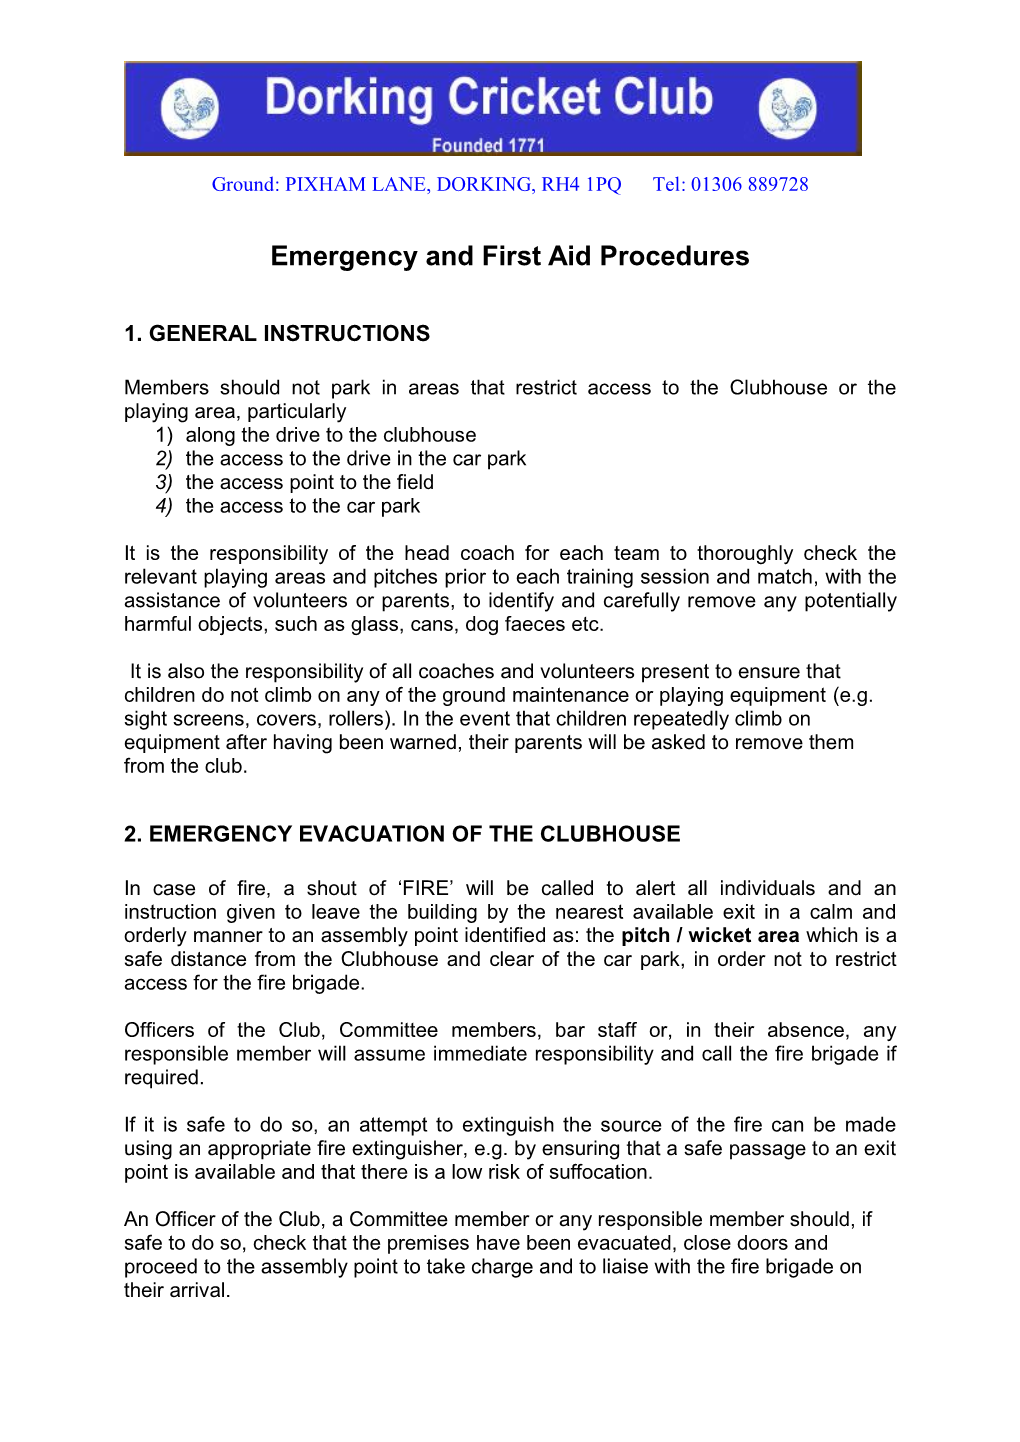 Emergency and First Aid Procedures